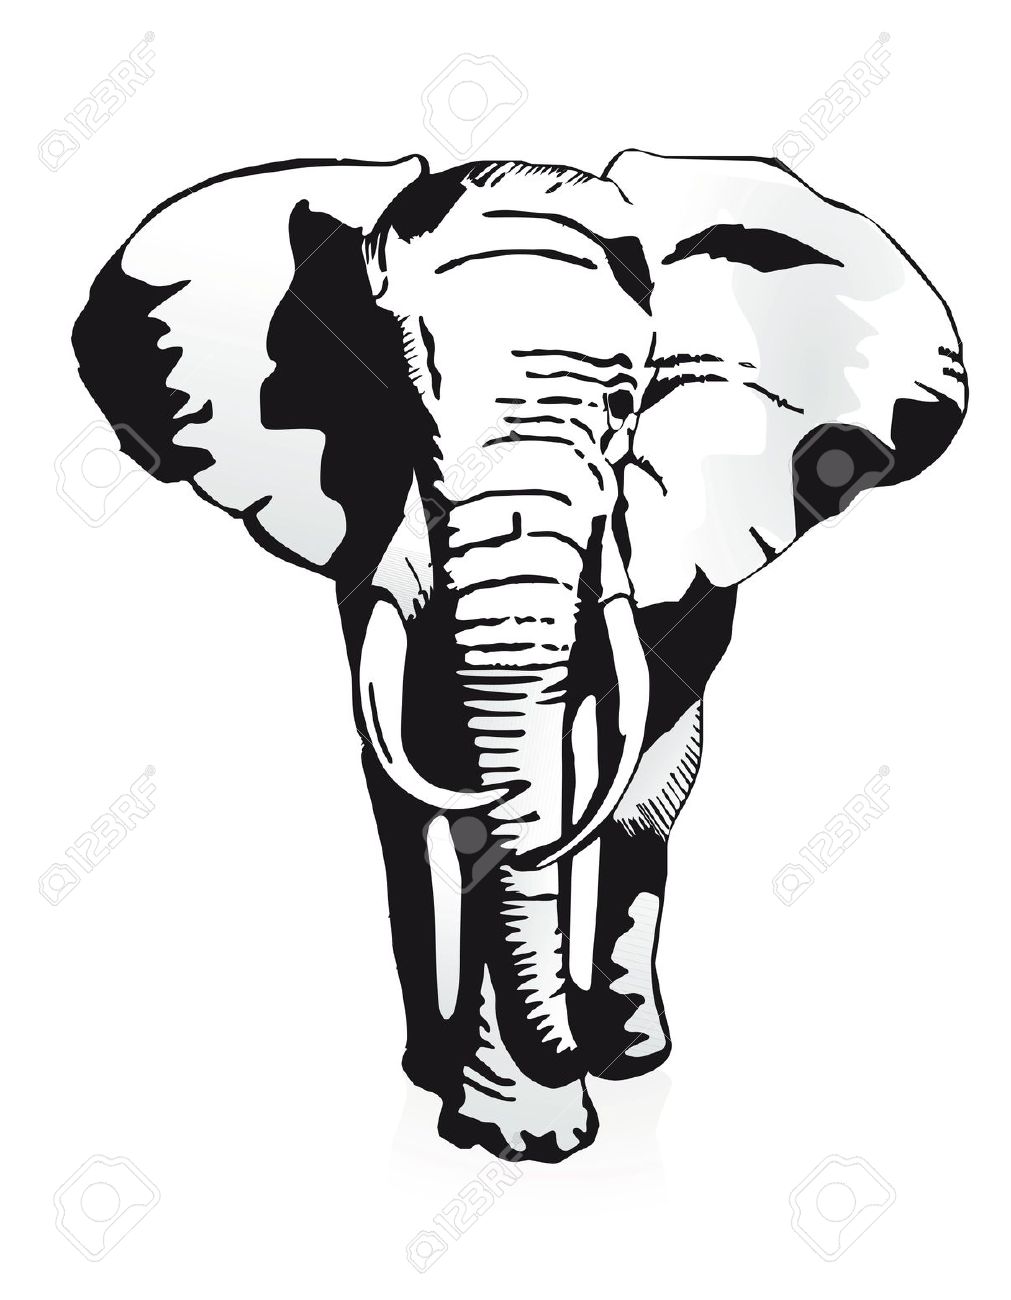 Elephant Images Black And White | Free download on ClipArtMag